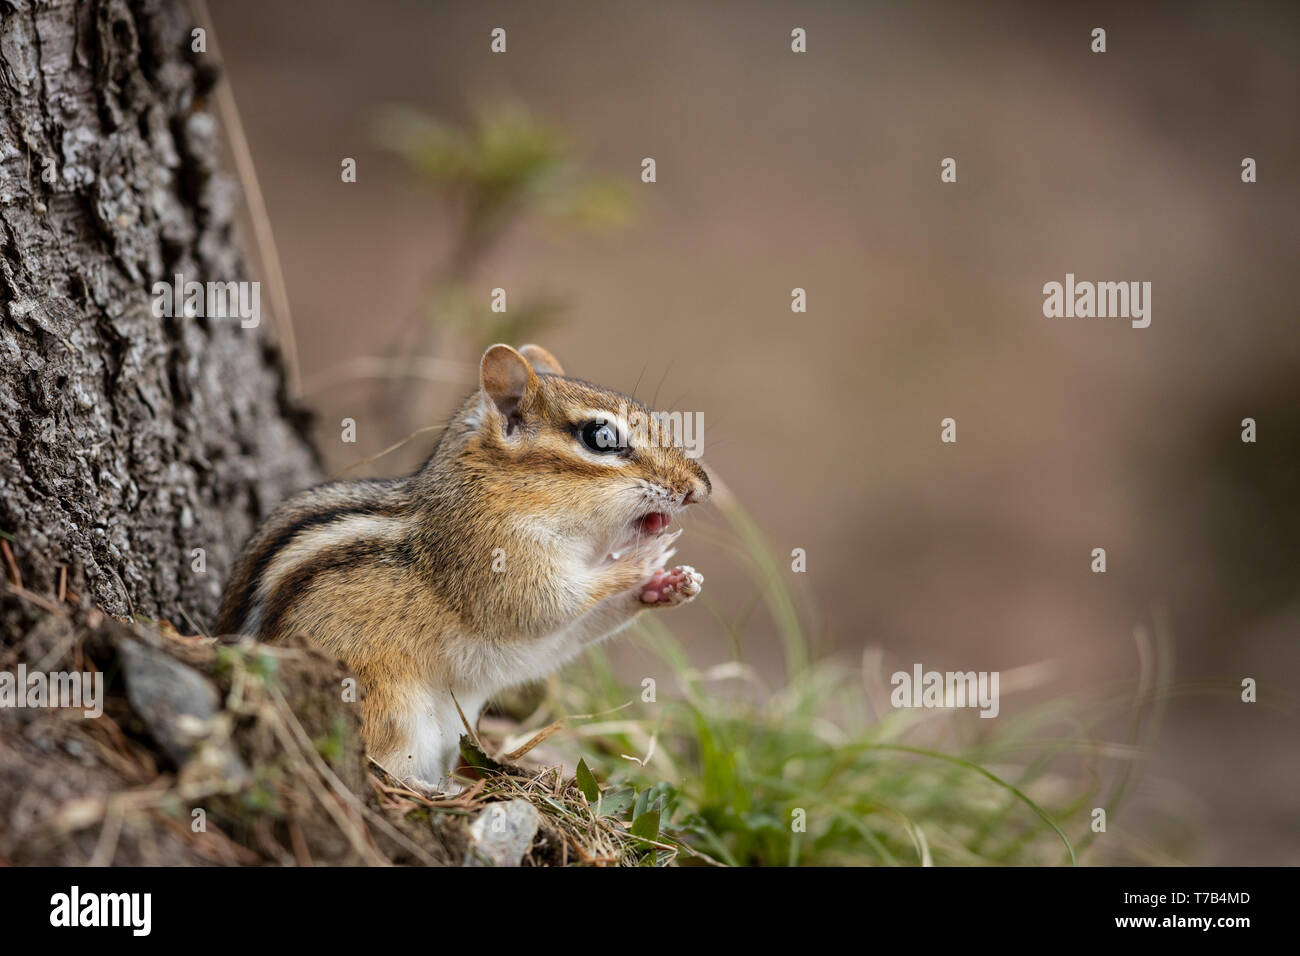 MAYNOOTH, ONTARIO, CANADA - April 29, 2019: A chipmunk (Tamias), part of the Sciuridae family forages for food.  ( Ryan Carter ) Stock Photo